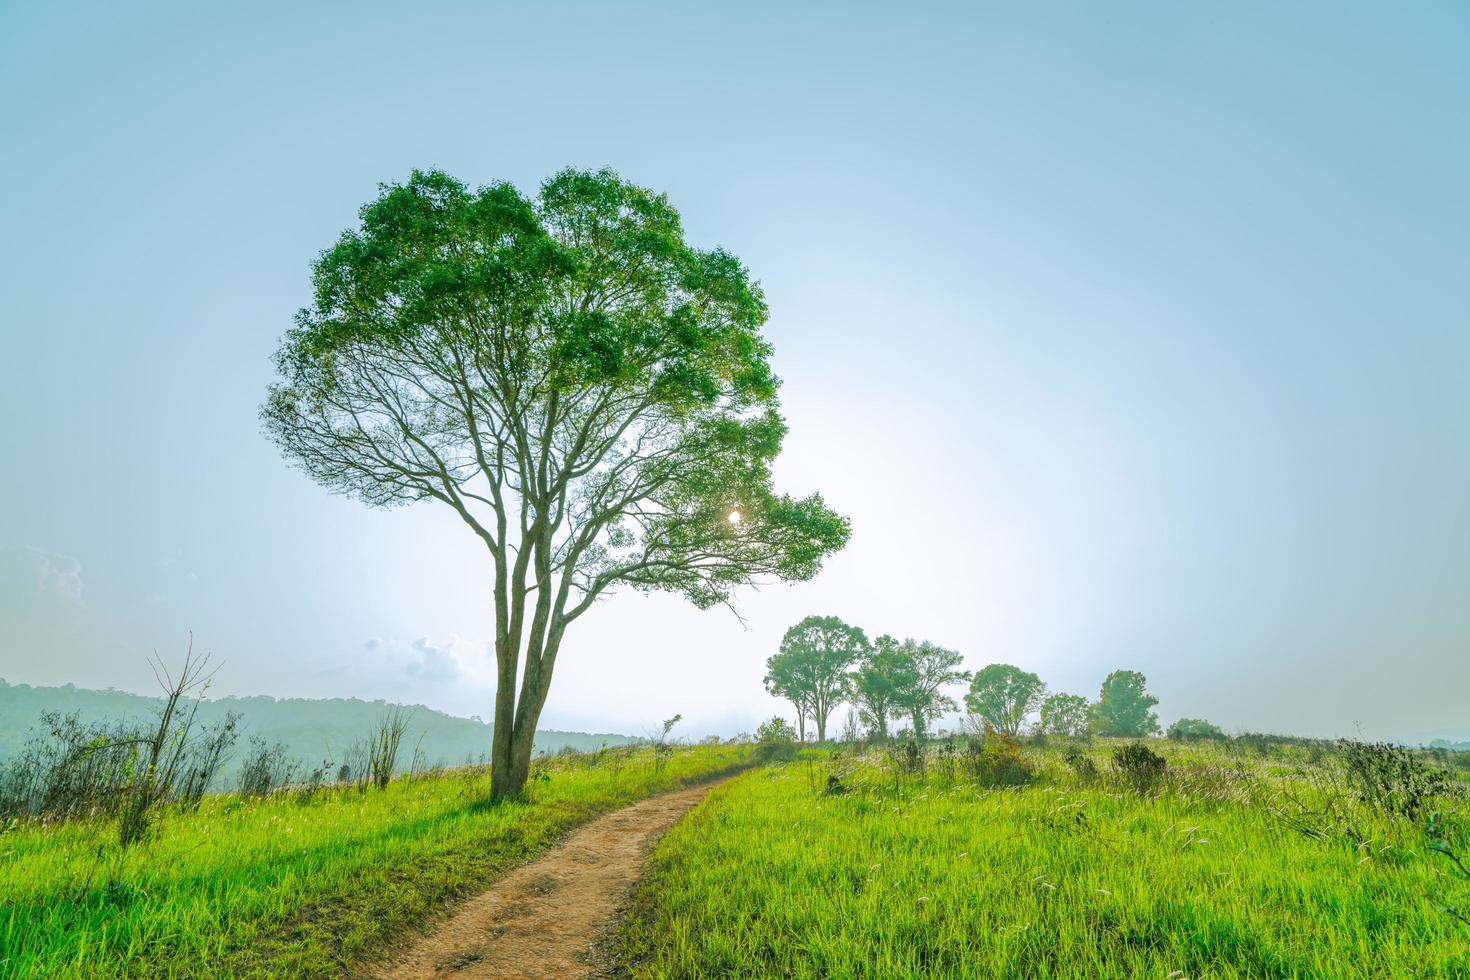 Beautiful rural landscape of green grass field with dusty country road and trees on hill near the mountain and clear blue sky. Nature composition photo